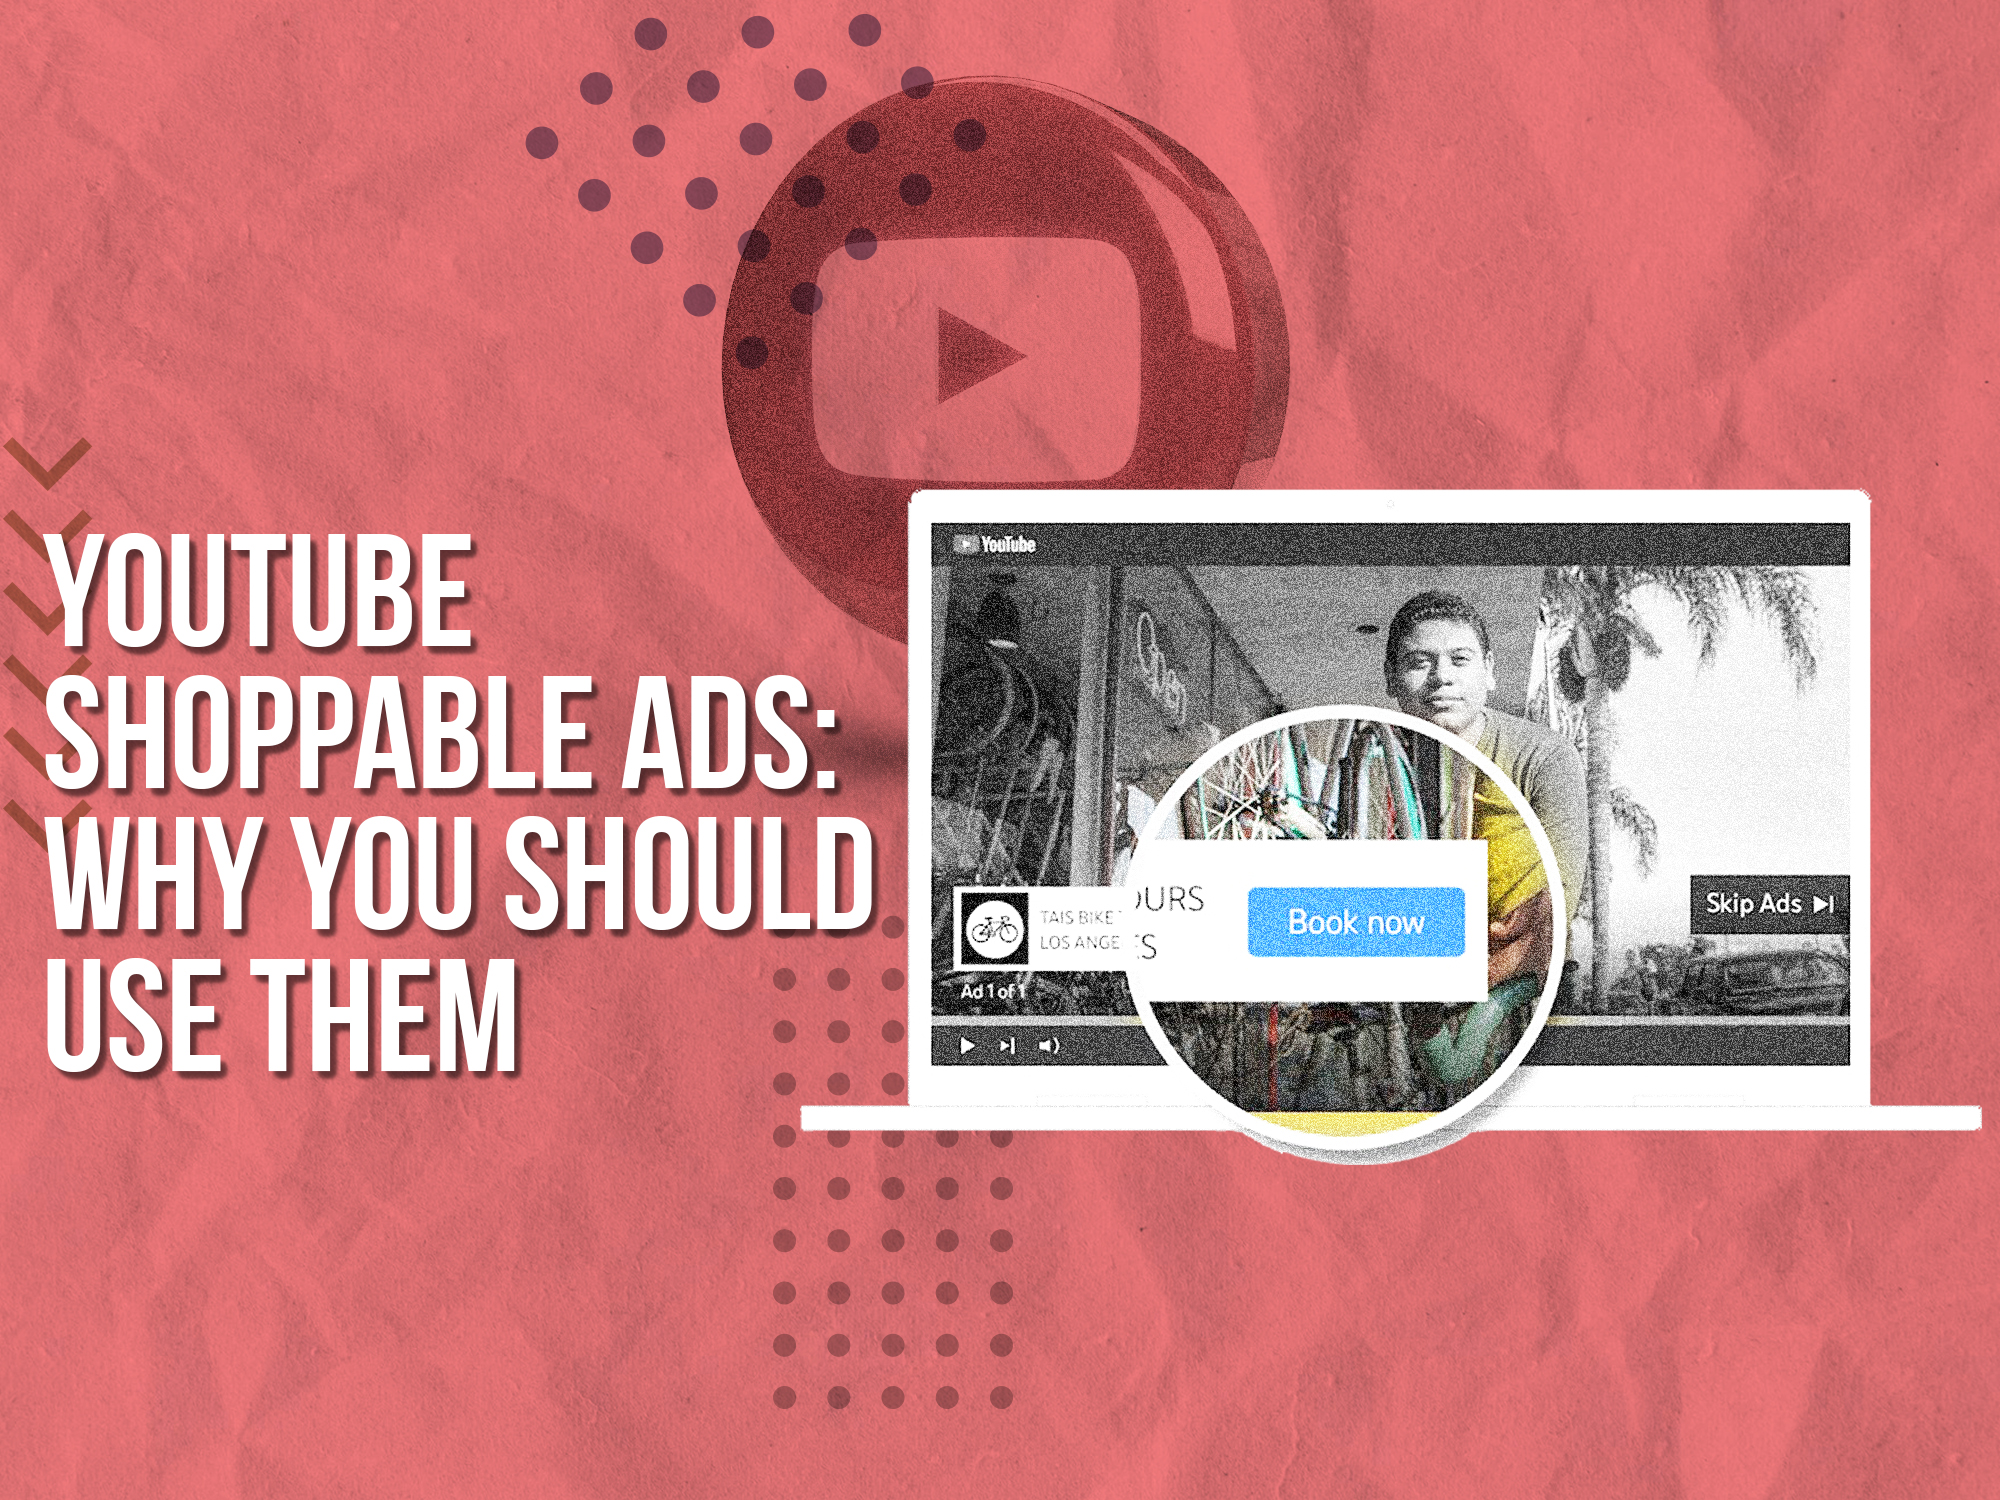 YouTube Shoppable Ads: Why You Should Use Them